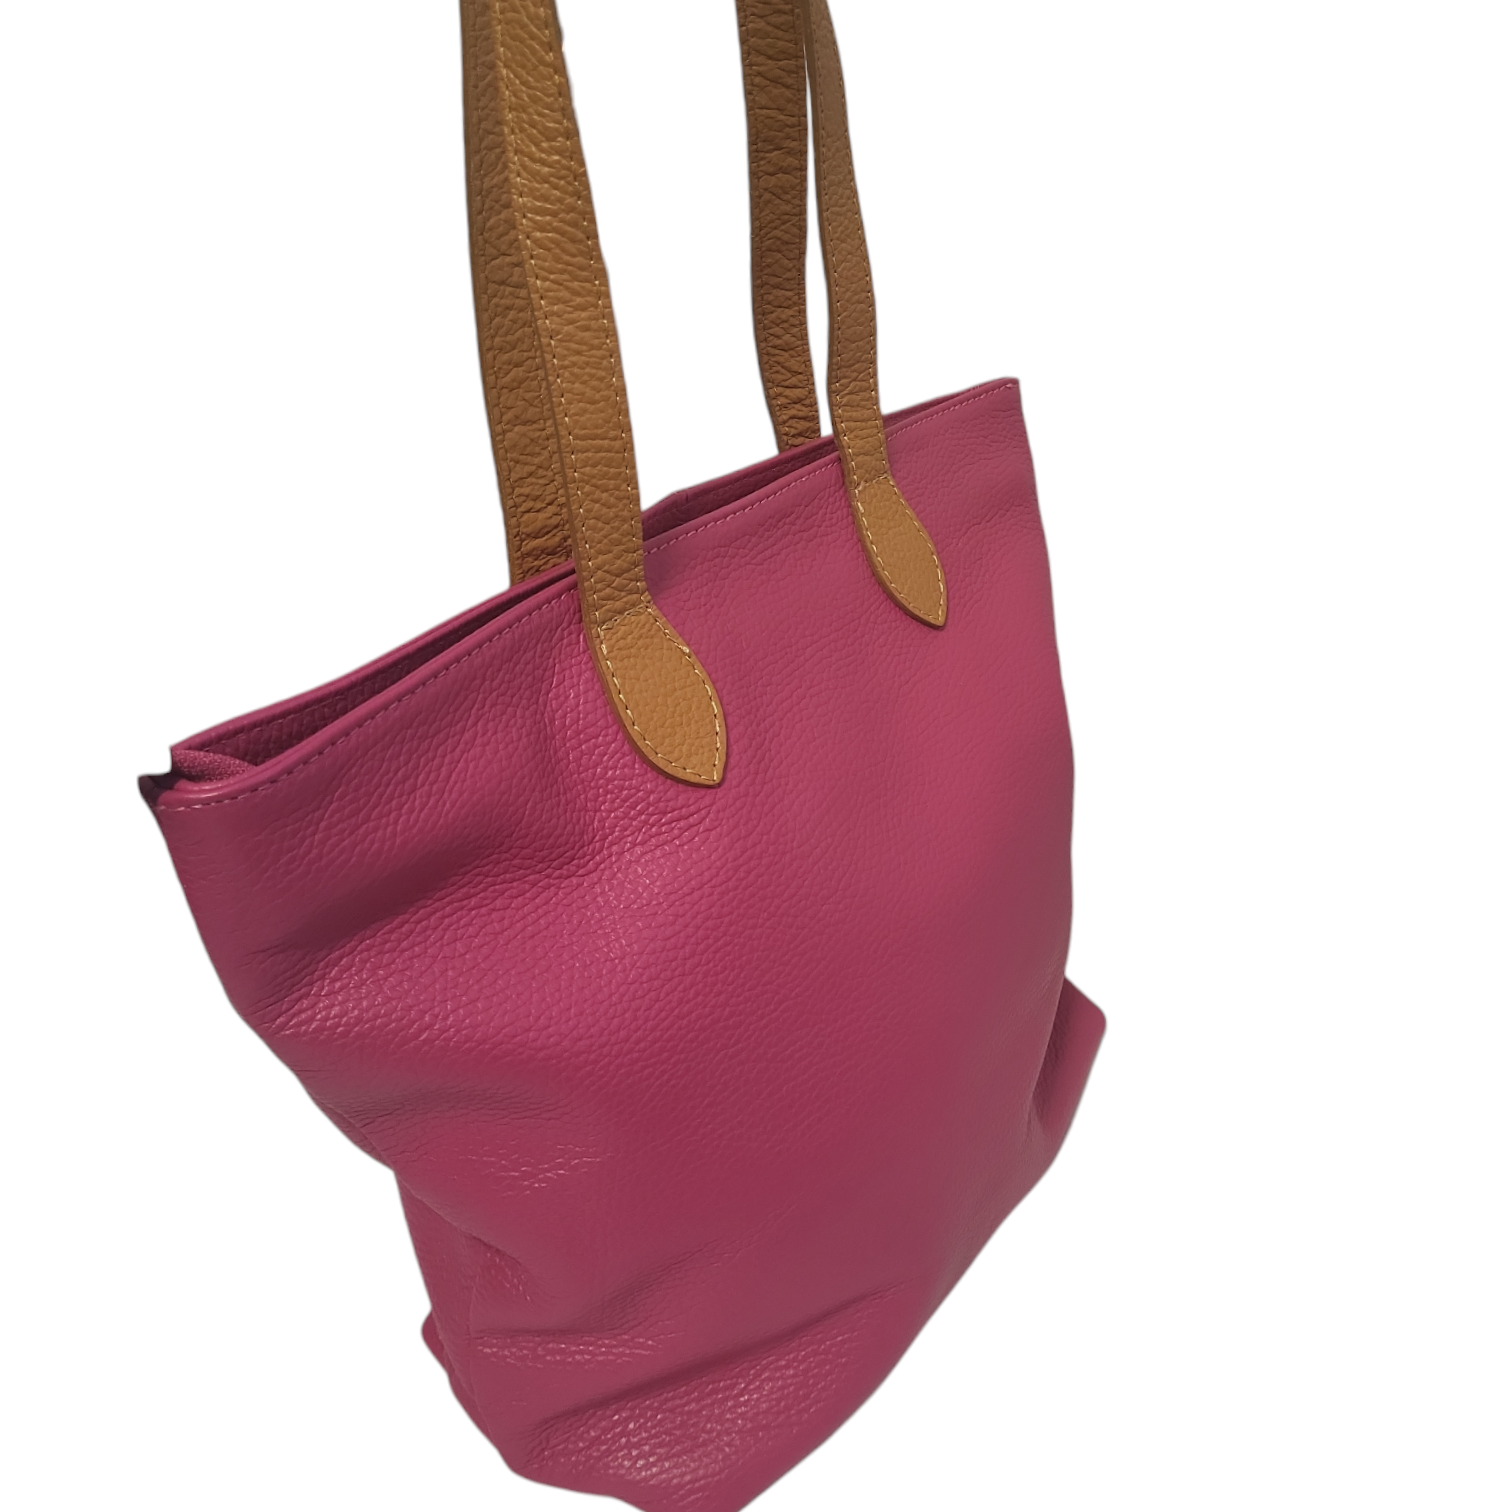 Bright pink leather bag with 2 brown handles side view